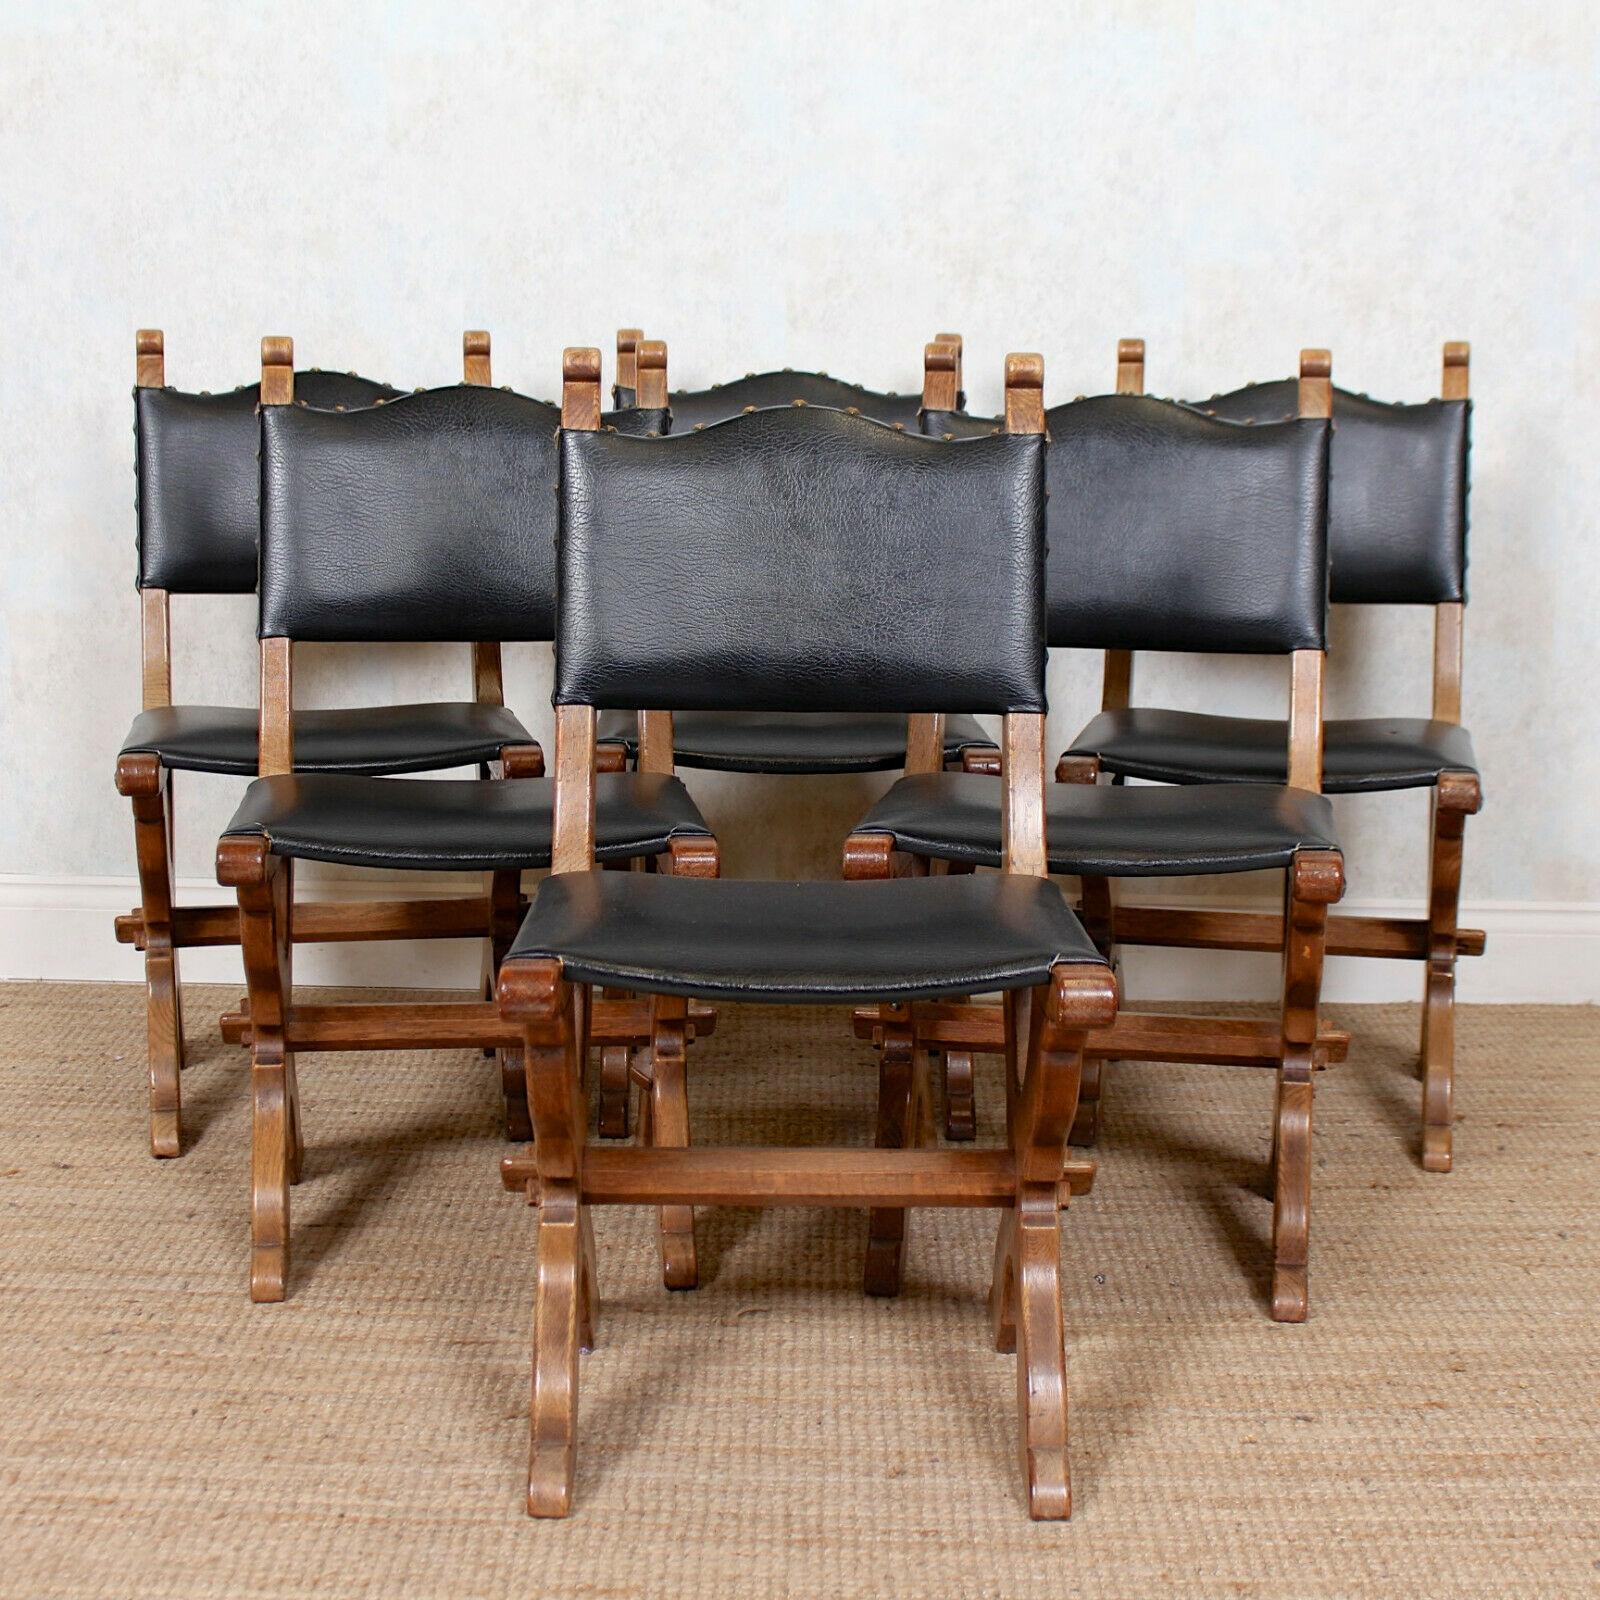 A fine quality set of six carved oak dining chairs in the Gothic manner.
Carved from solid oak using an impressive simple medieval style chip technique.
The upholstered backs and seats bordered with carved studded pegs and raised on carved